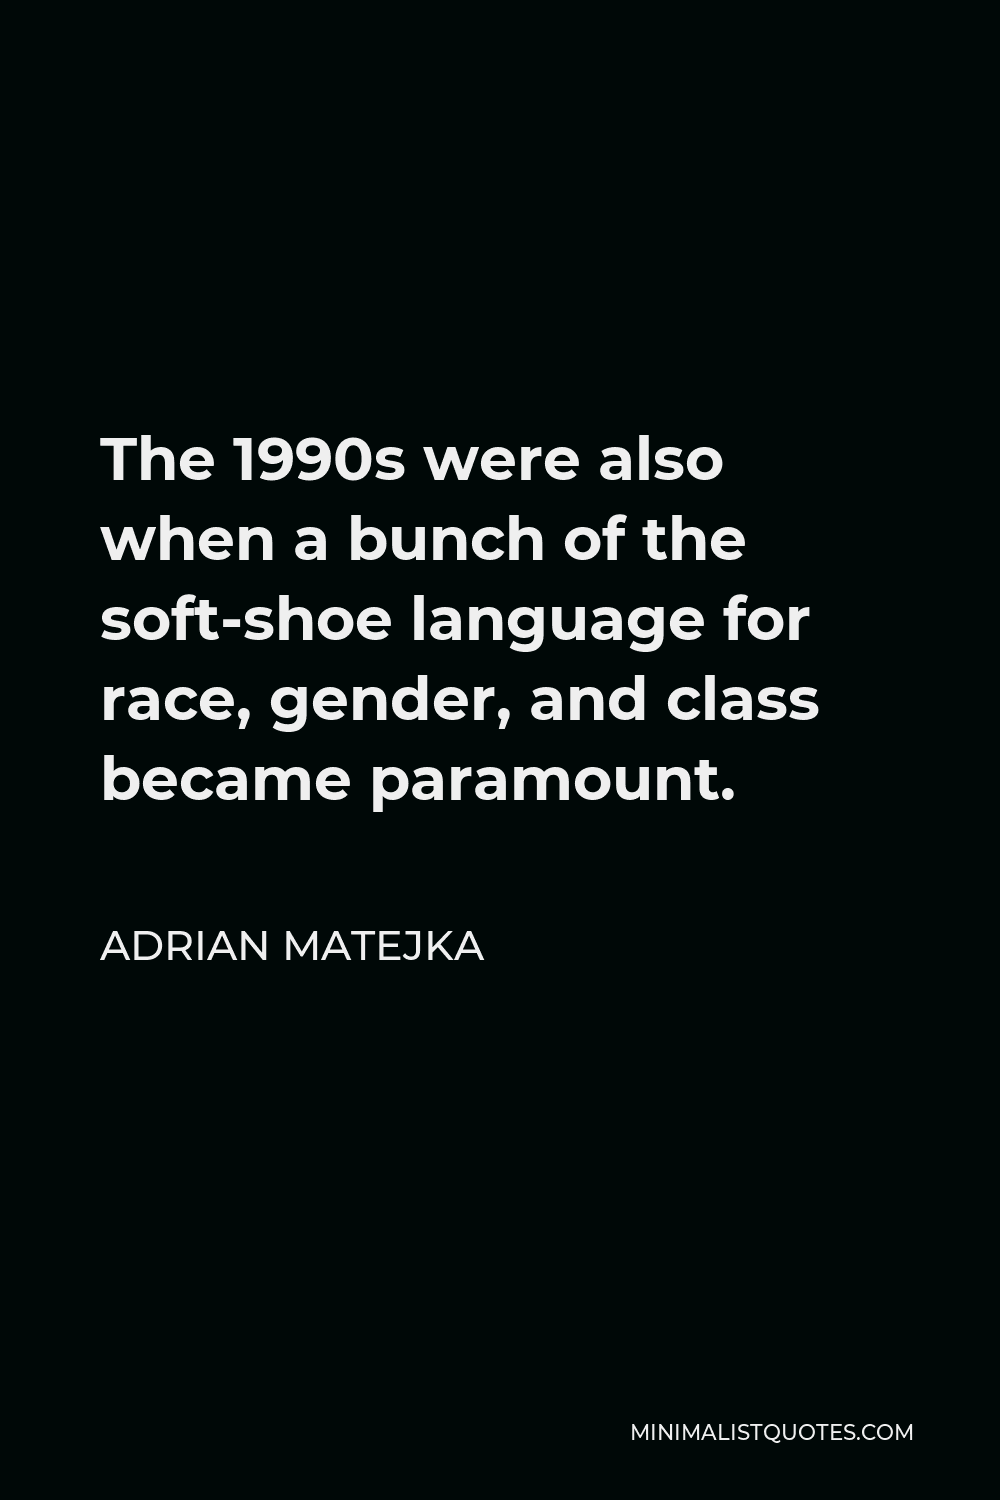 Adrian Matejka Quote - The 1990s were also when a bunch of the soft-shoe language for race, gender, and class became paramount.